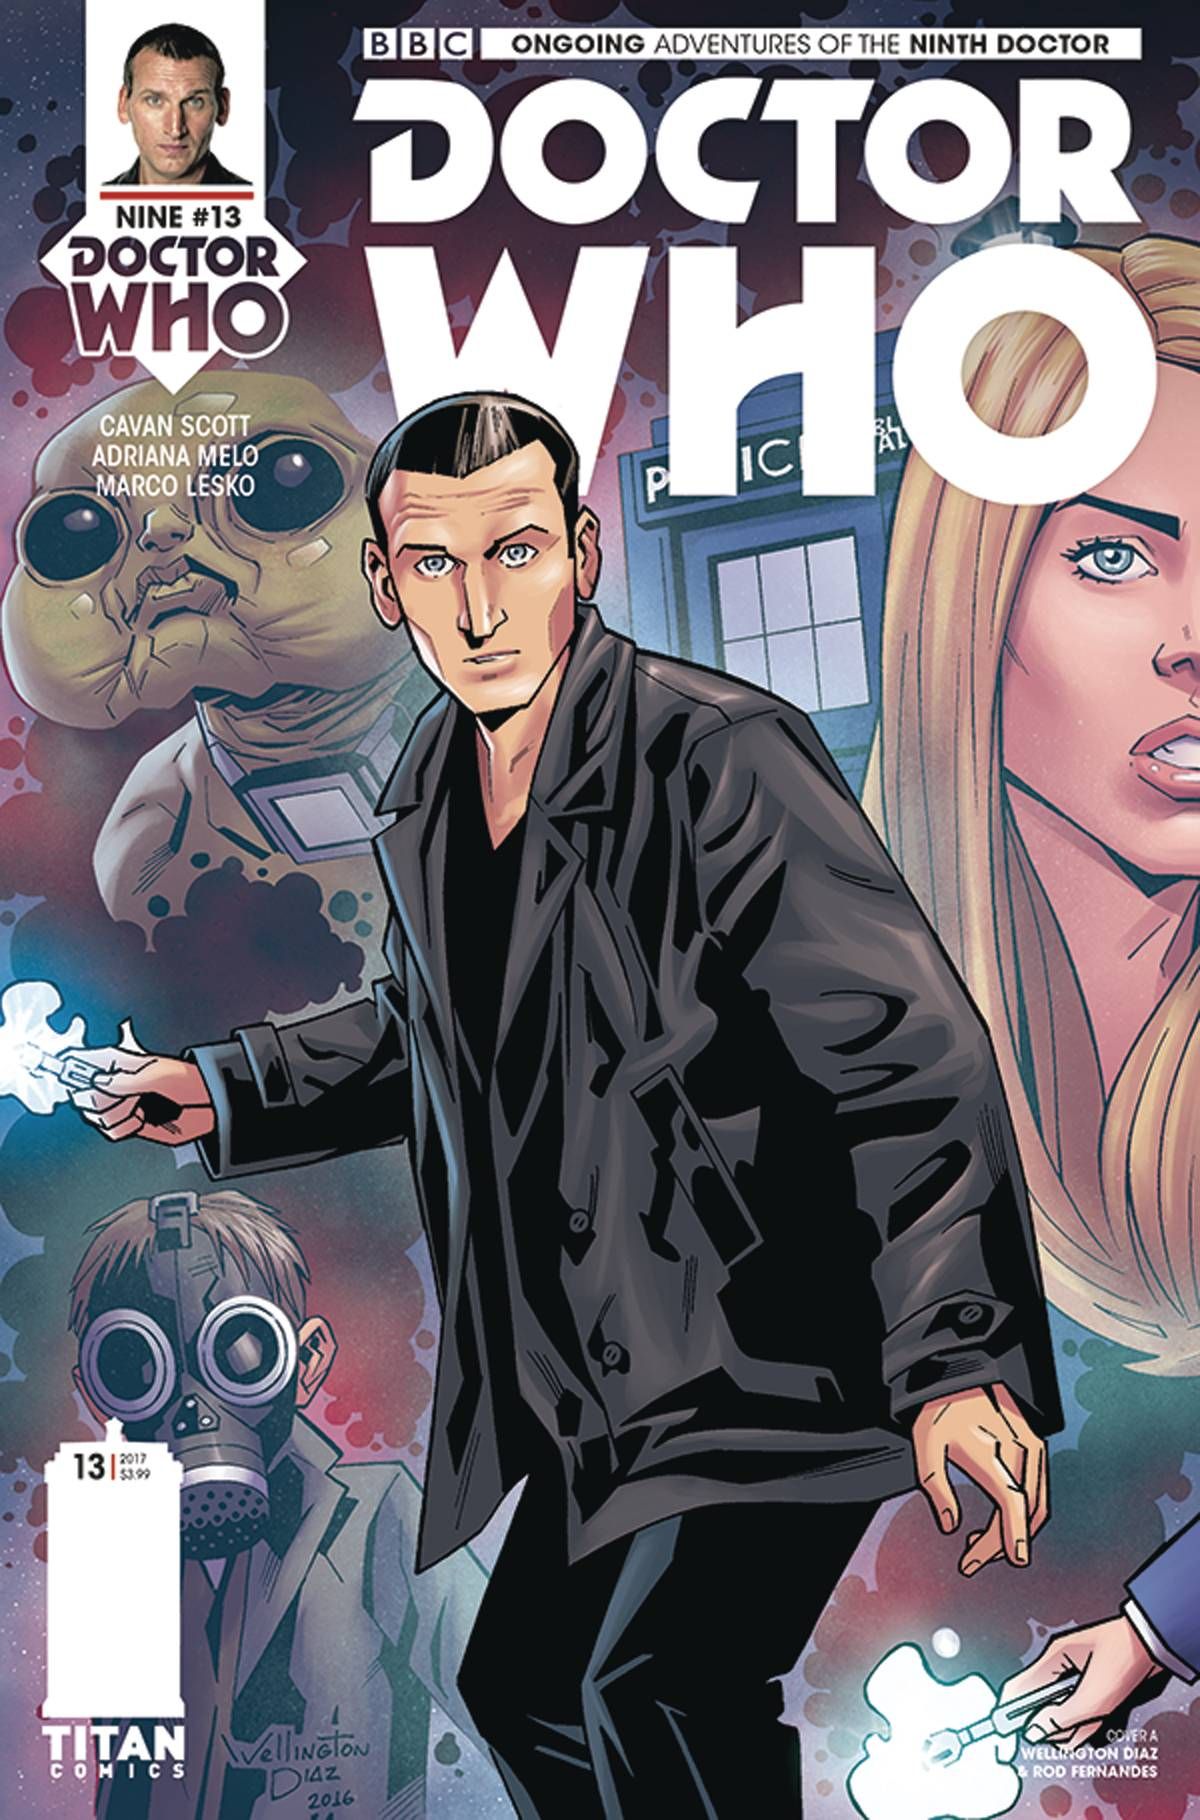 Doctor Who: The Ninth Doctor (Ongoing) #13 Comic